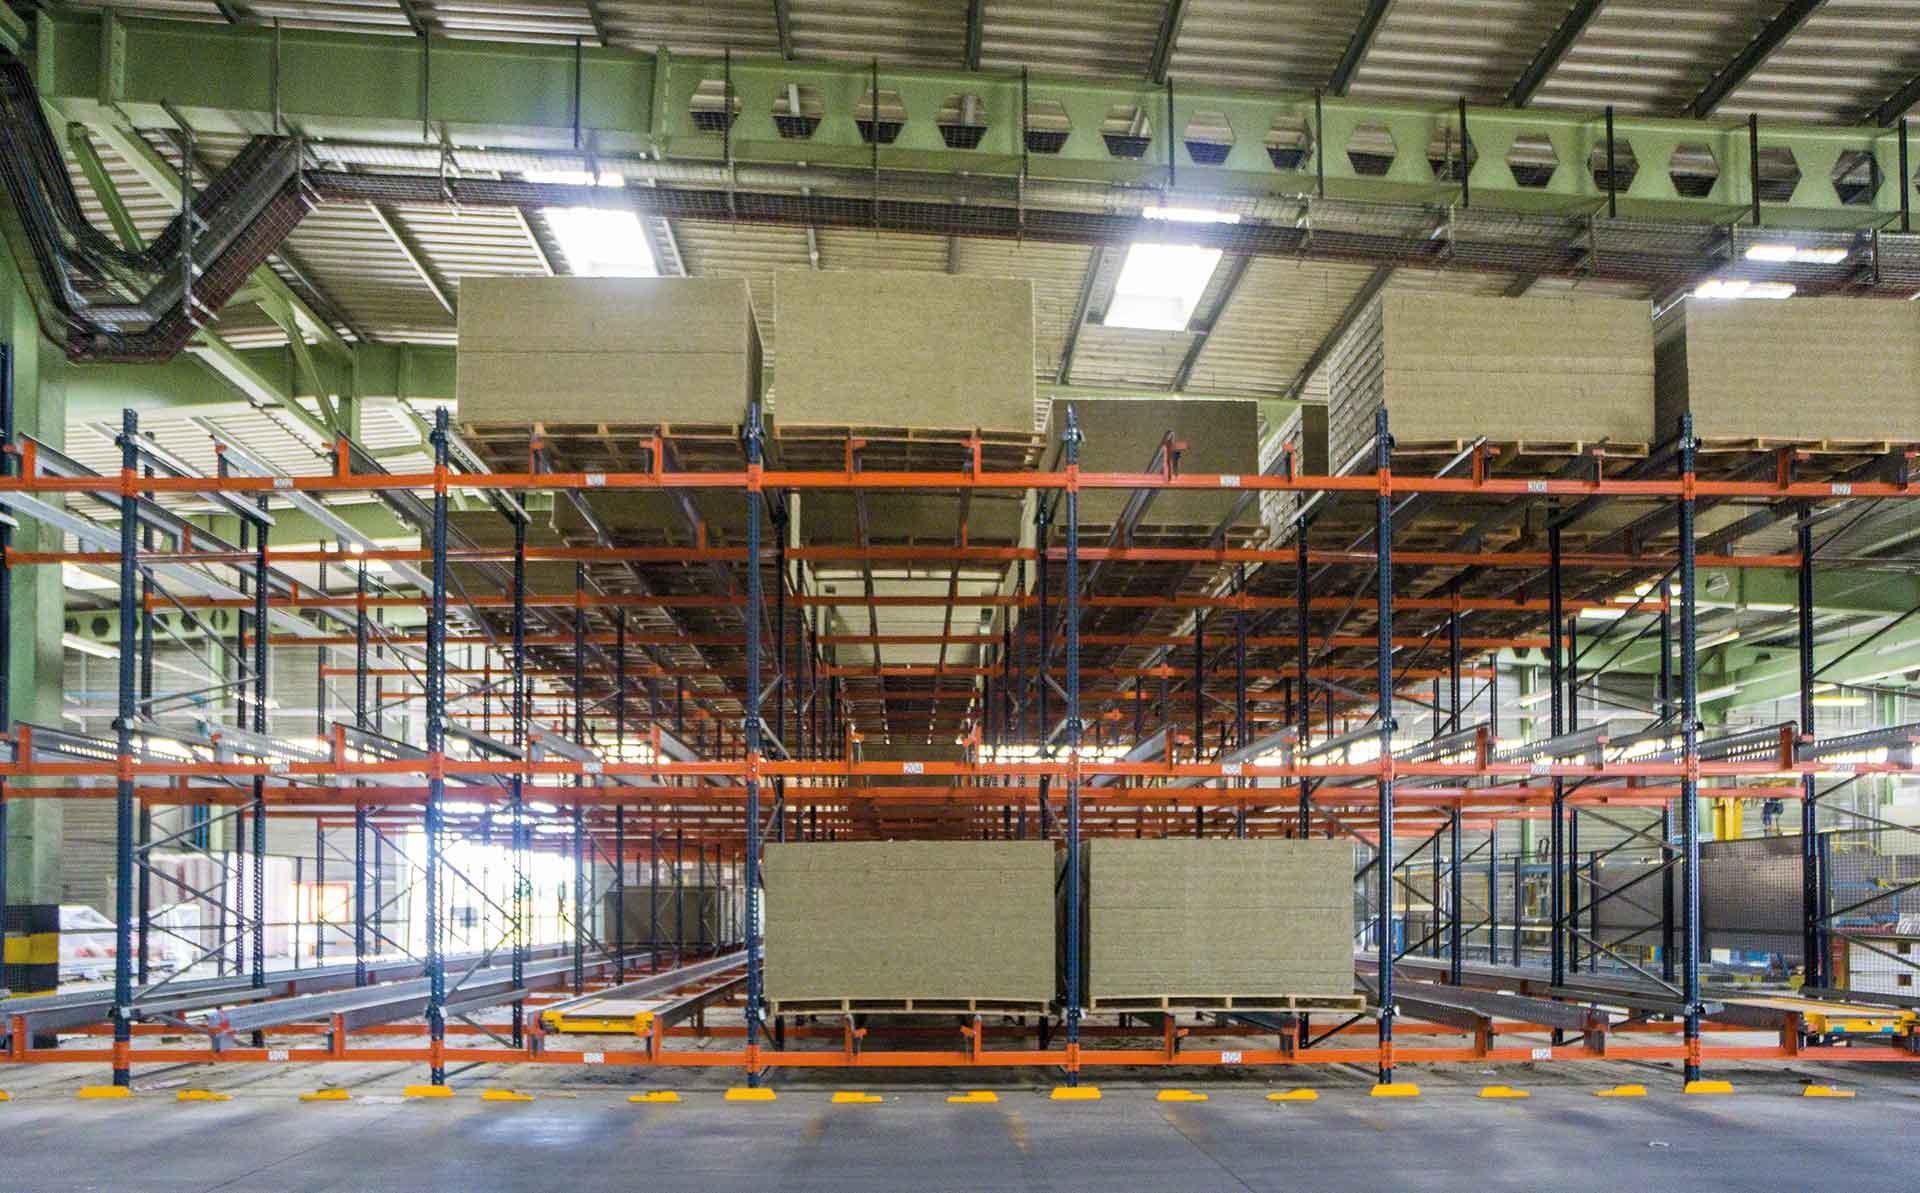 The partnership between high-density pallet racking storage and the Pallet Shuttle makes it possible to handle bulky goods